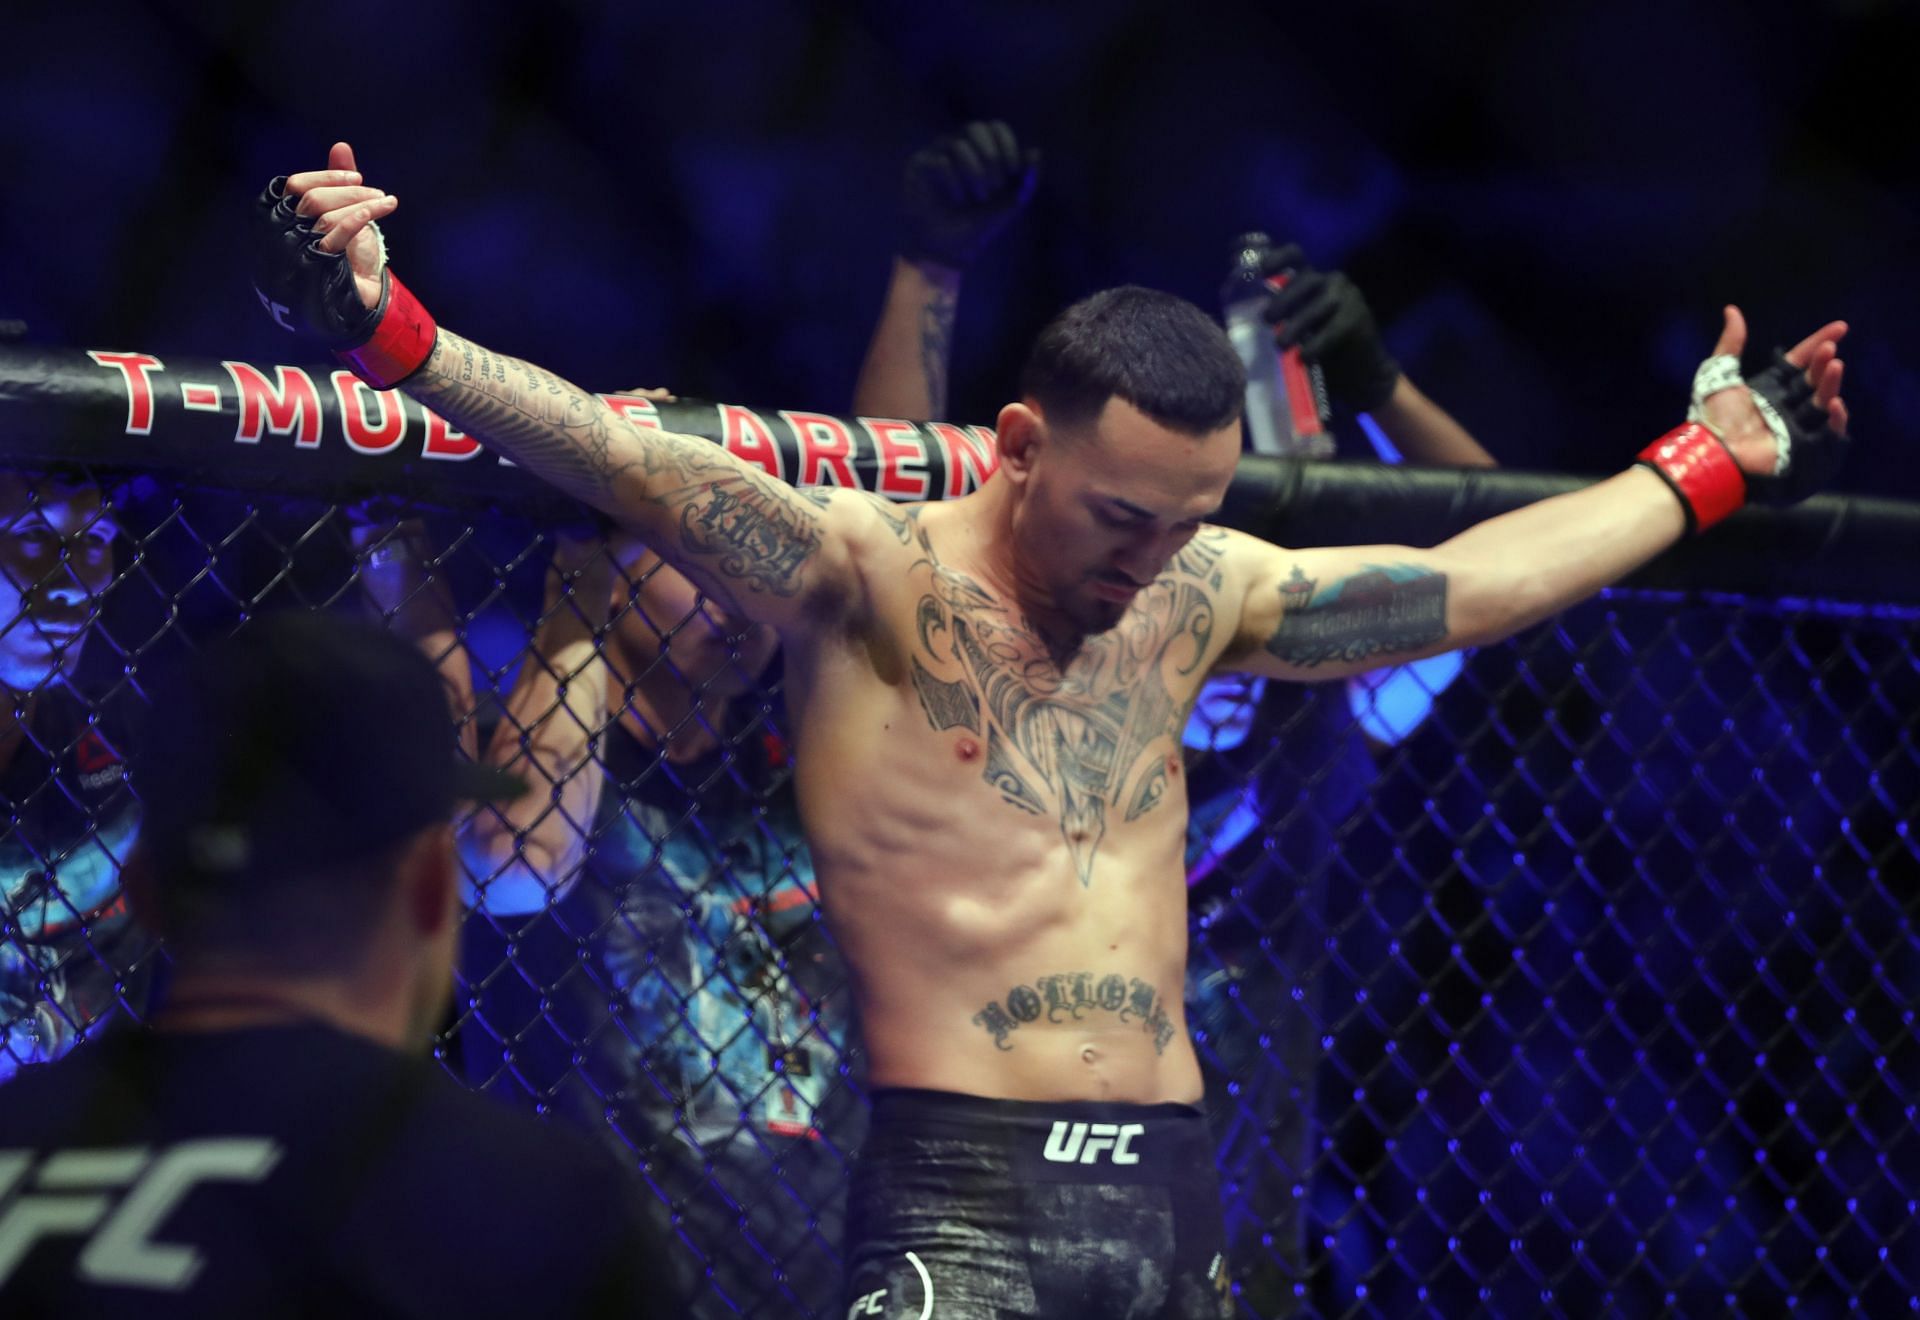 Max Holloway has a record of 23-6